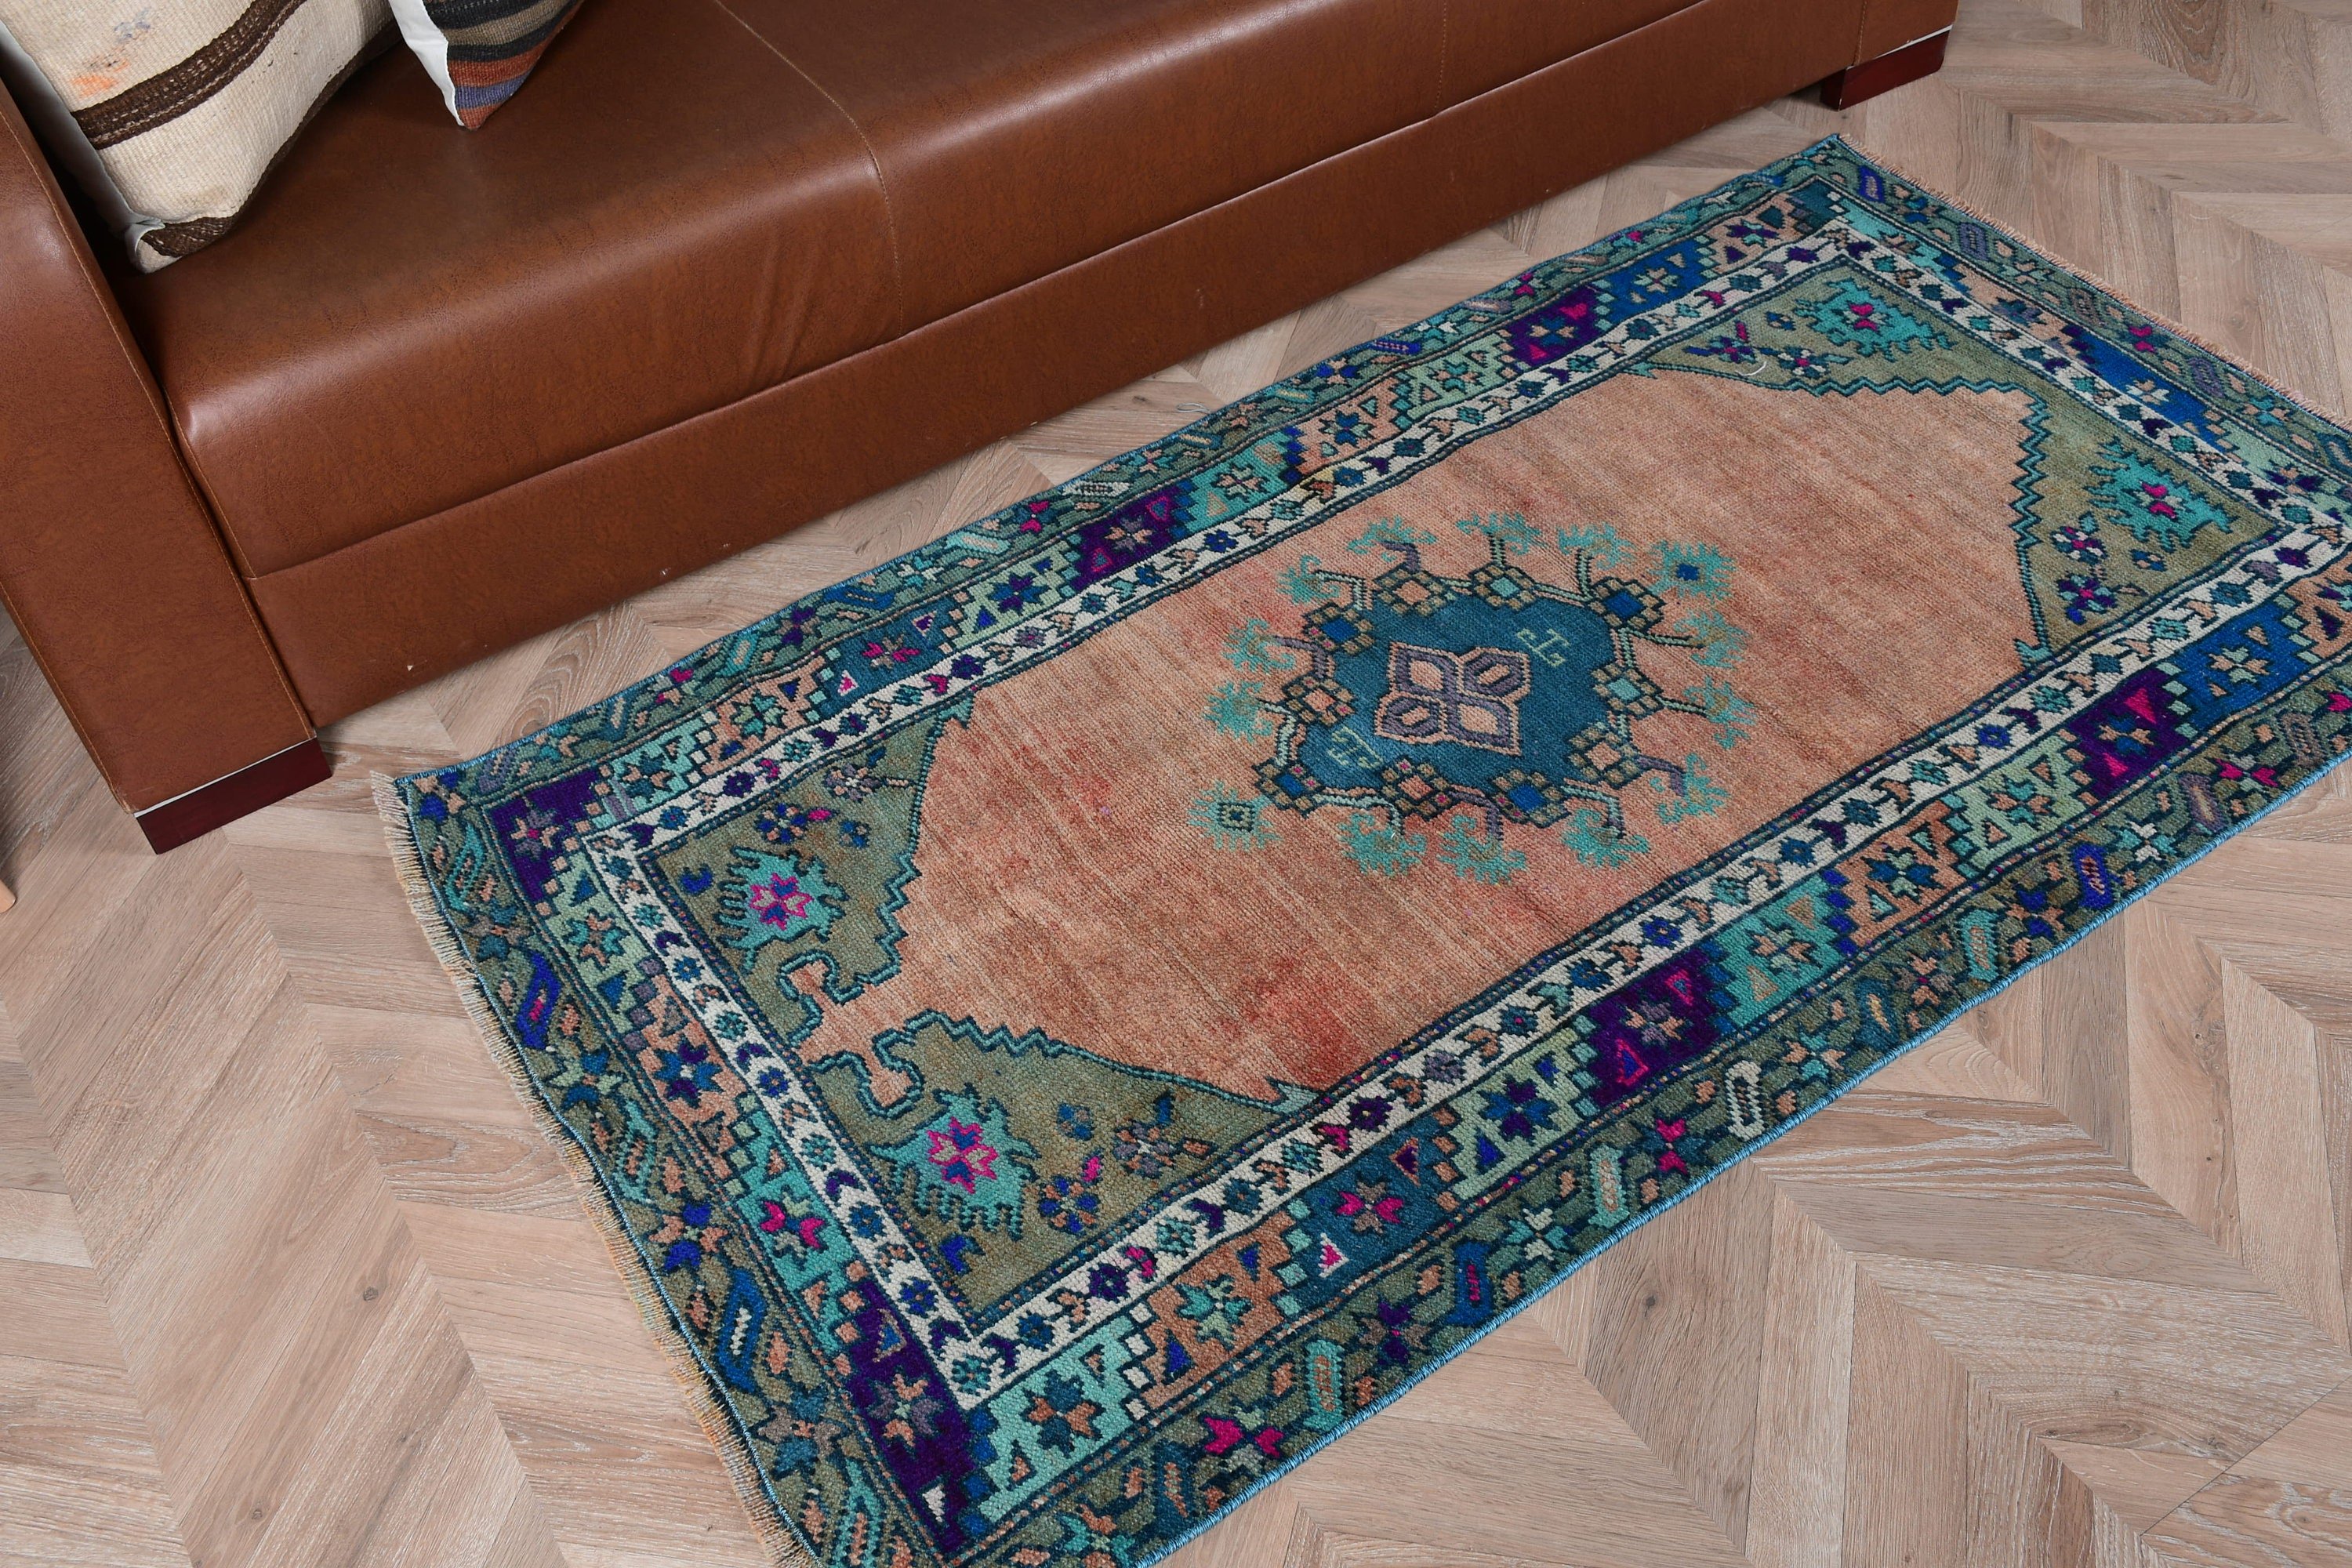 Retro Rugs, Rugs for Bedroom, Antique Rug, Kitchen Rugs, Vintage Rugs, Green Moroccan Rug, Bedroom Rug, 2.9x5.2 ft Accent Rug, Turkish Rugs